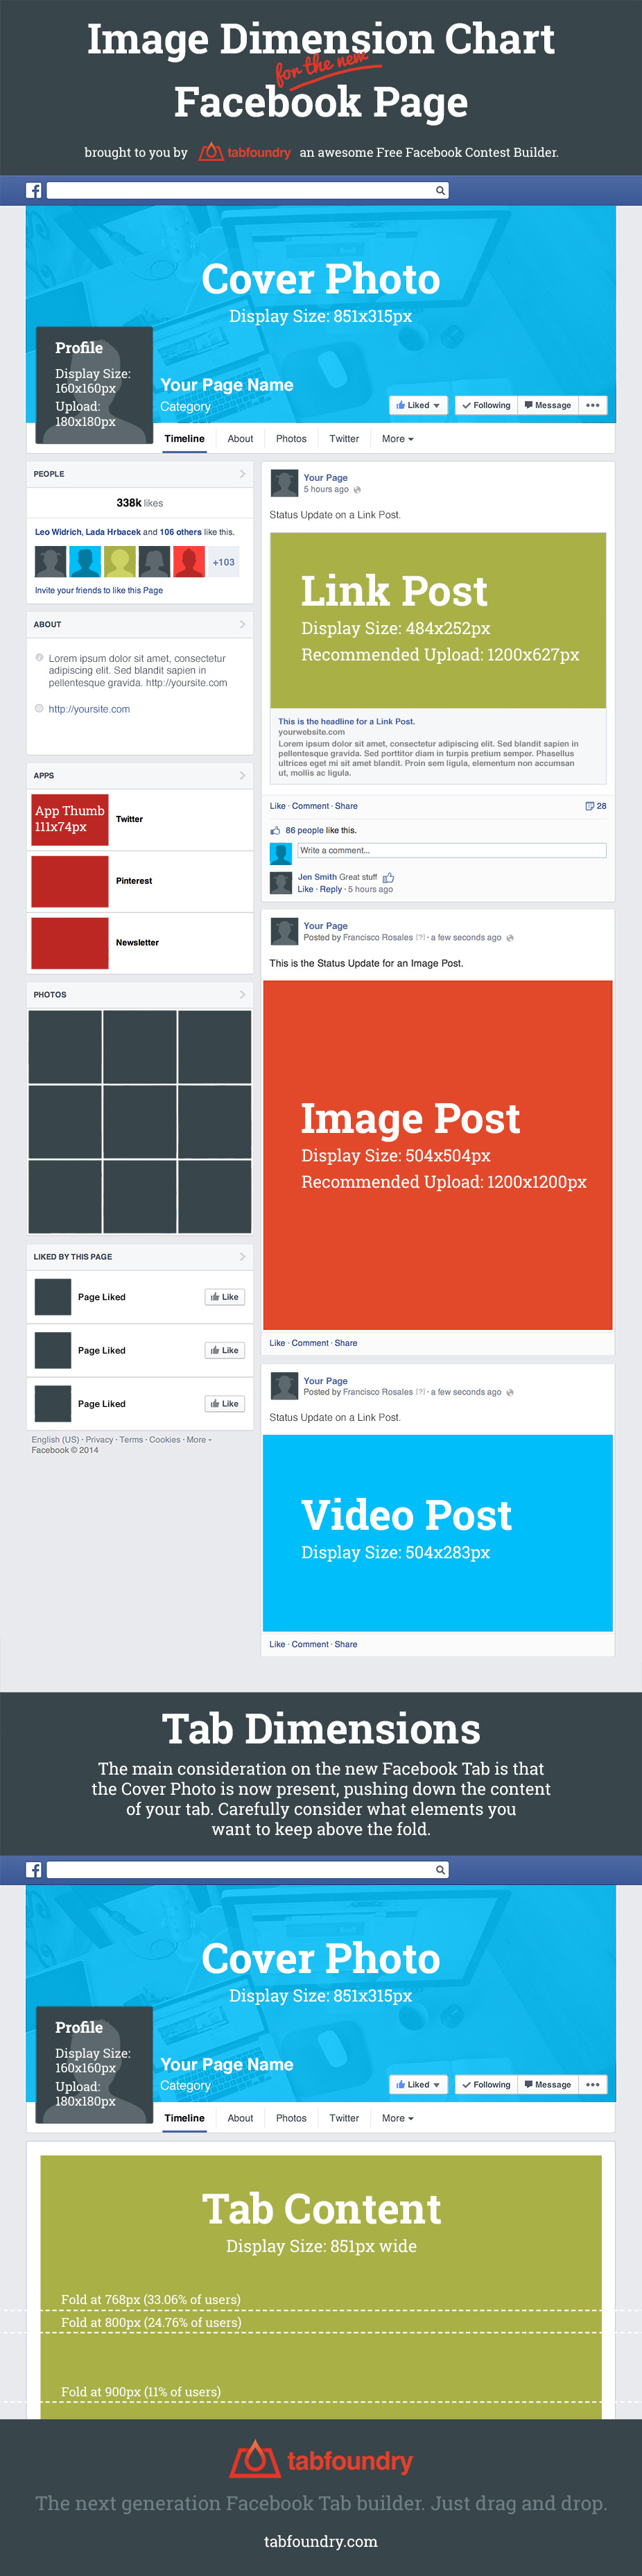 Image Dimension Chart for the new Facebook Page